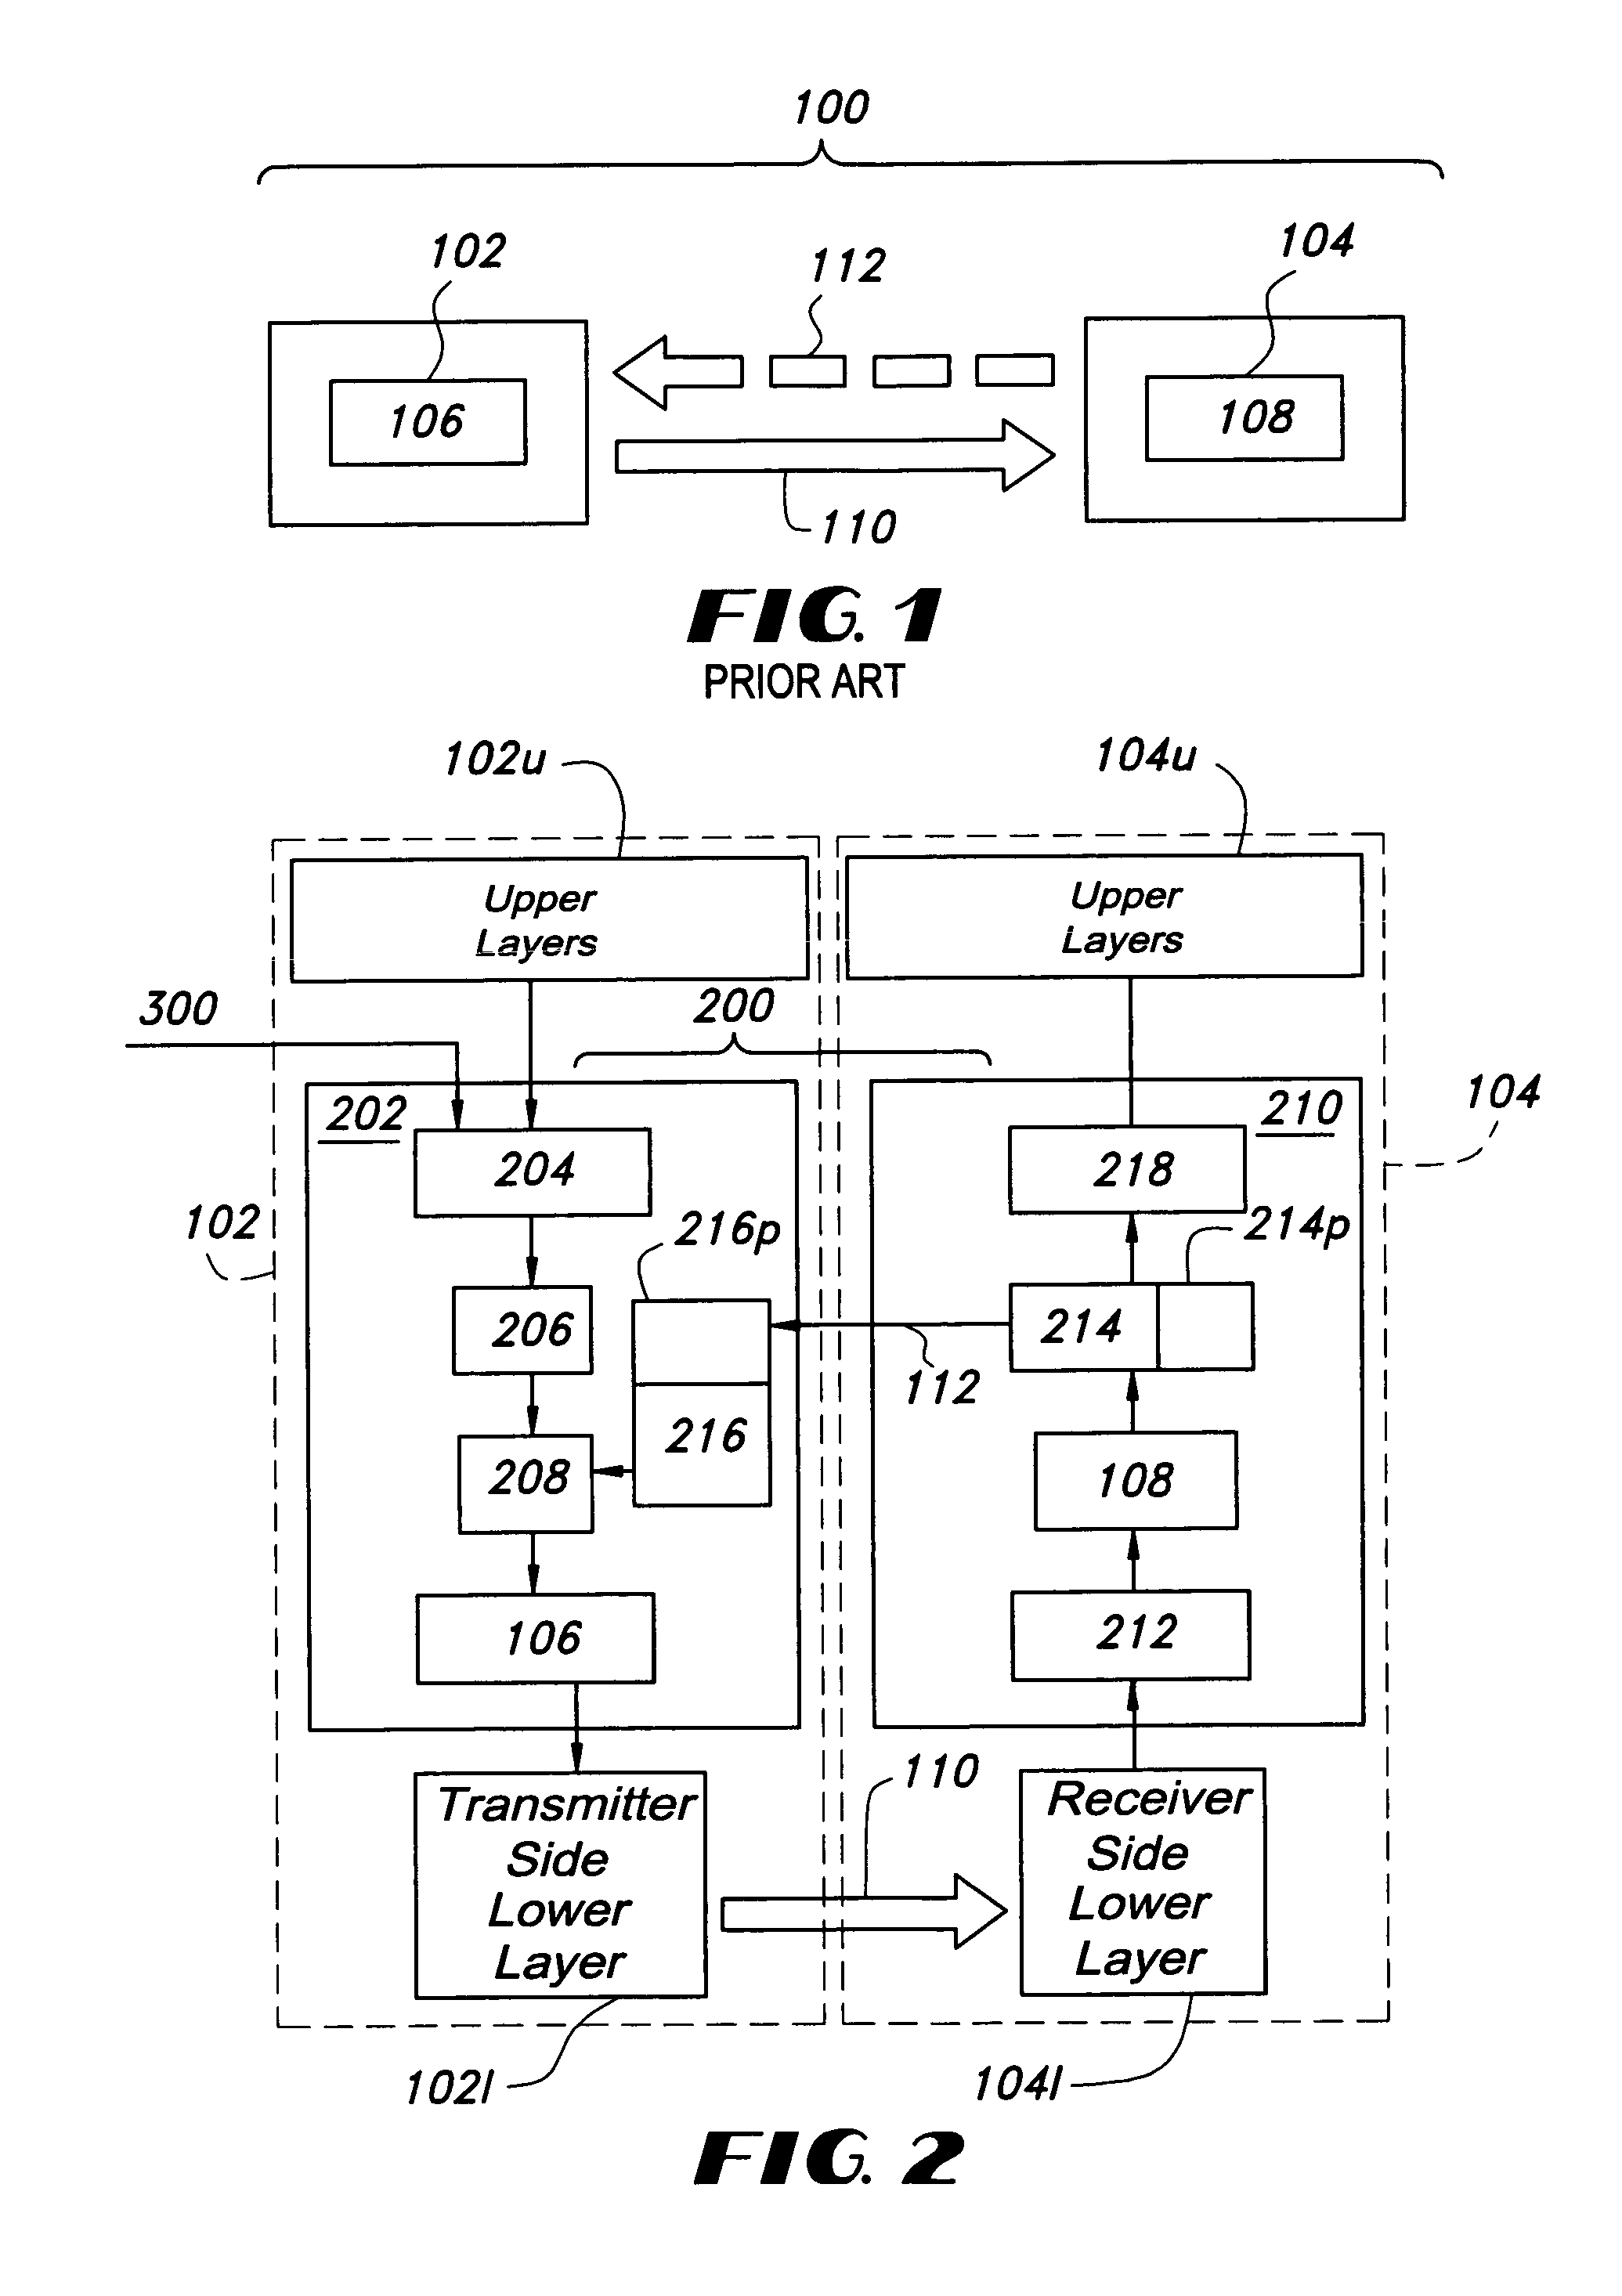 Methods and devices for partial upper layer frame loss detection based retransmission